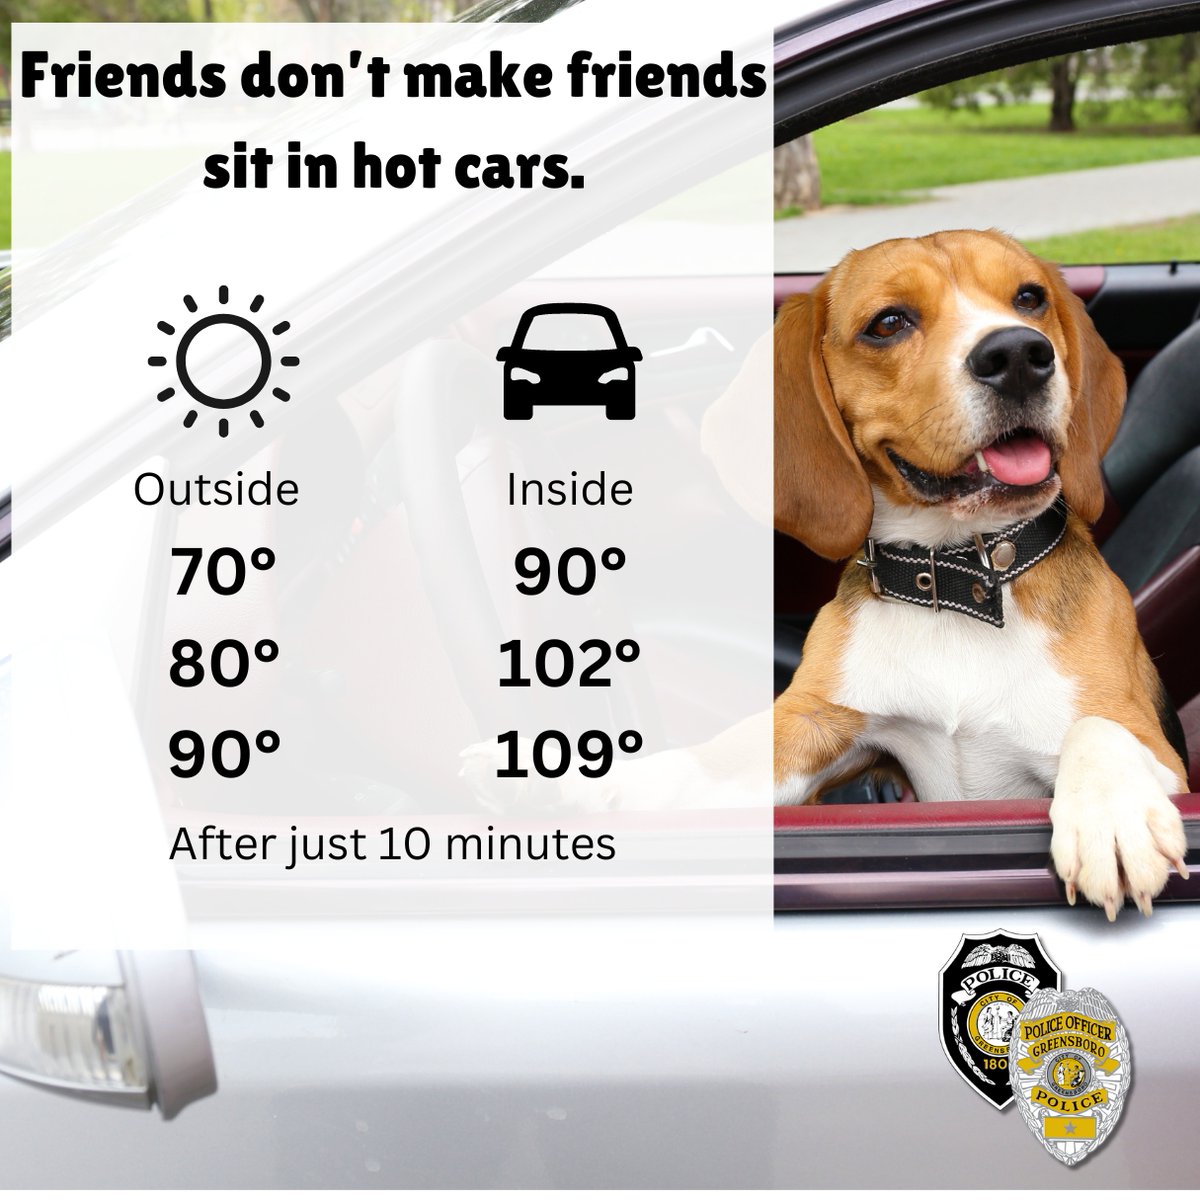 Temperatures will be in the upper 80s this week so stay cool! You wanna know something that's not cool? Leaving your pets in a hot car!